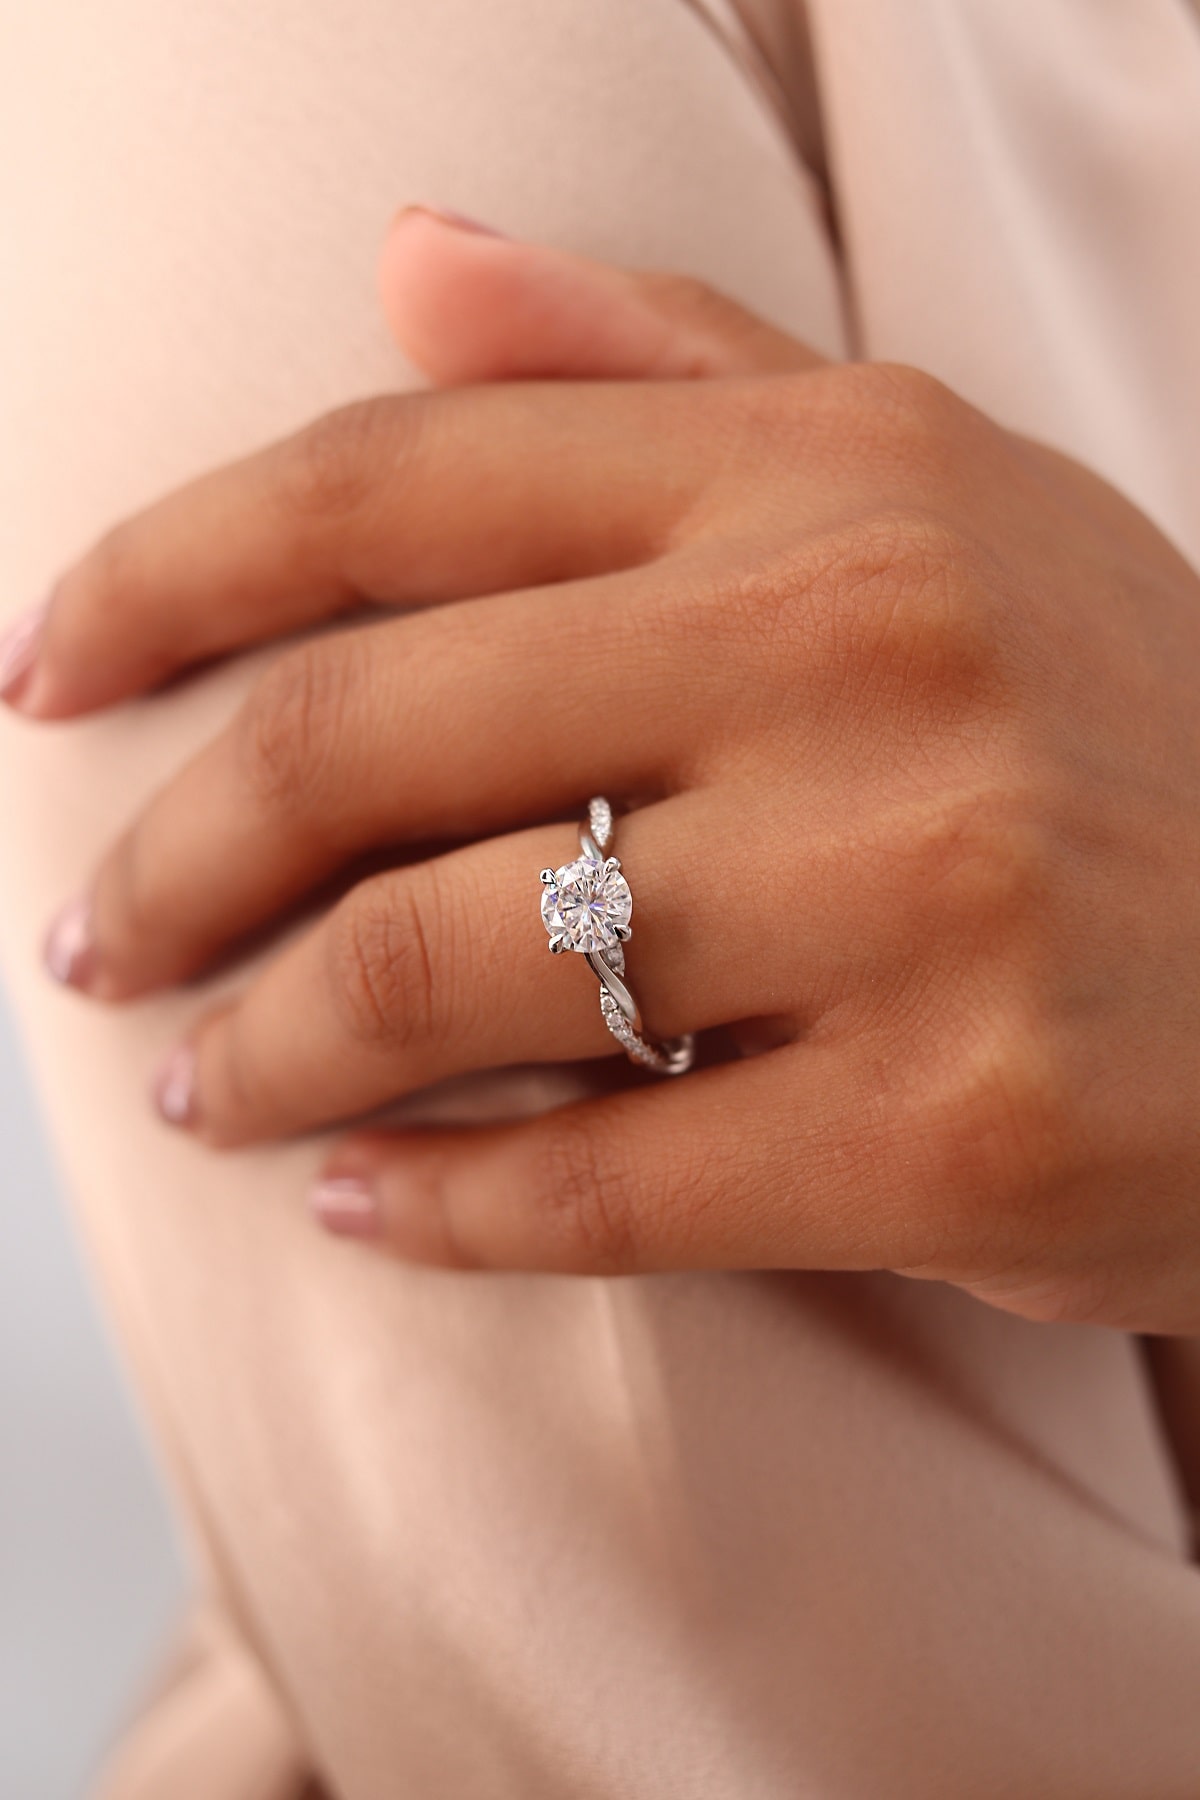 Proposal Ideas: Should You Consider a Lab
Diamond Engagement Ring?